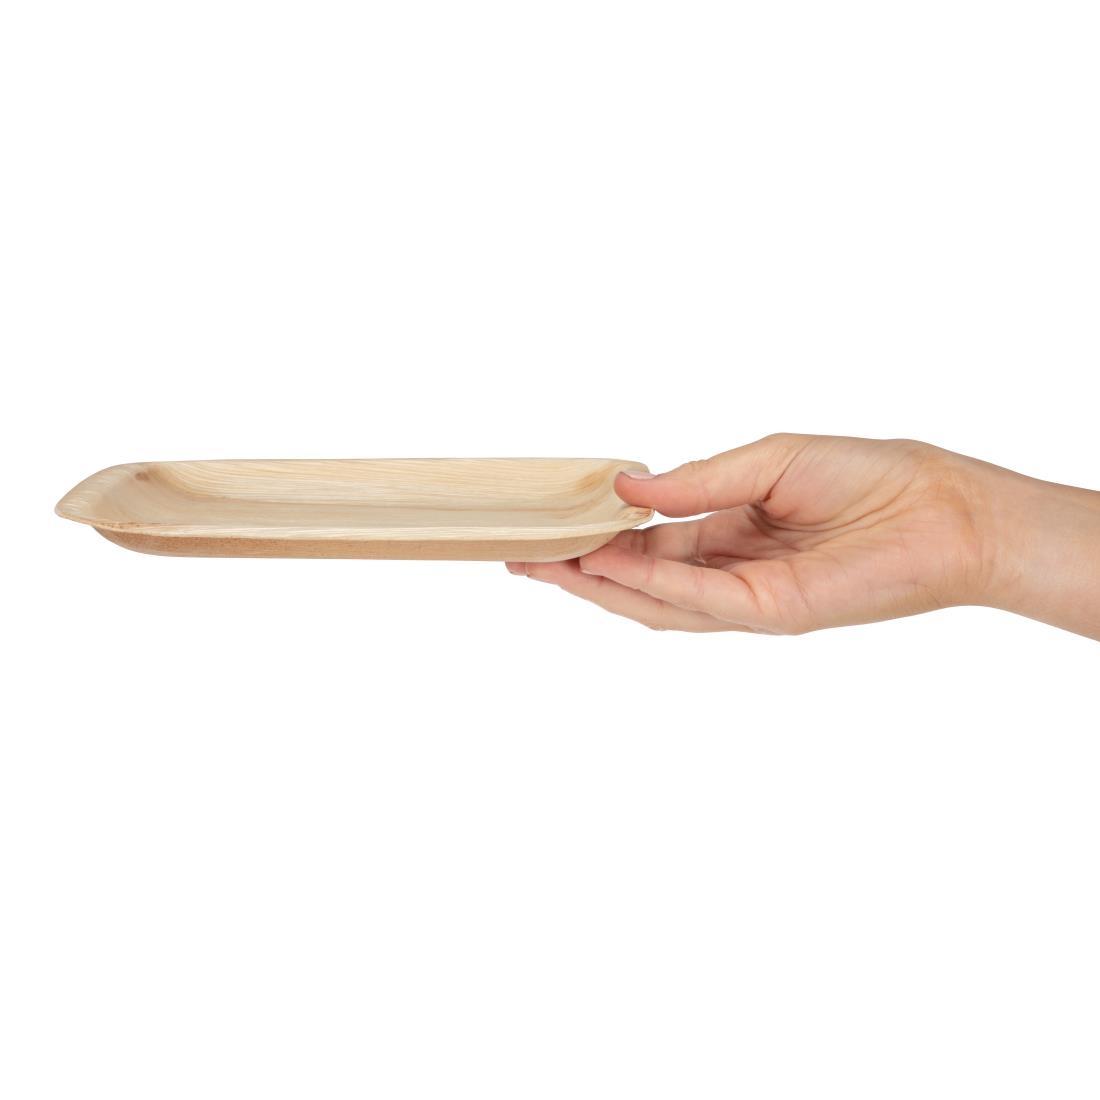 Fiesta Compostable Palm Leaf Plates Square 200mm (Pack of 100) - DK376  - 4